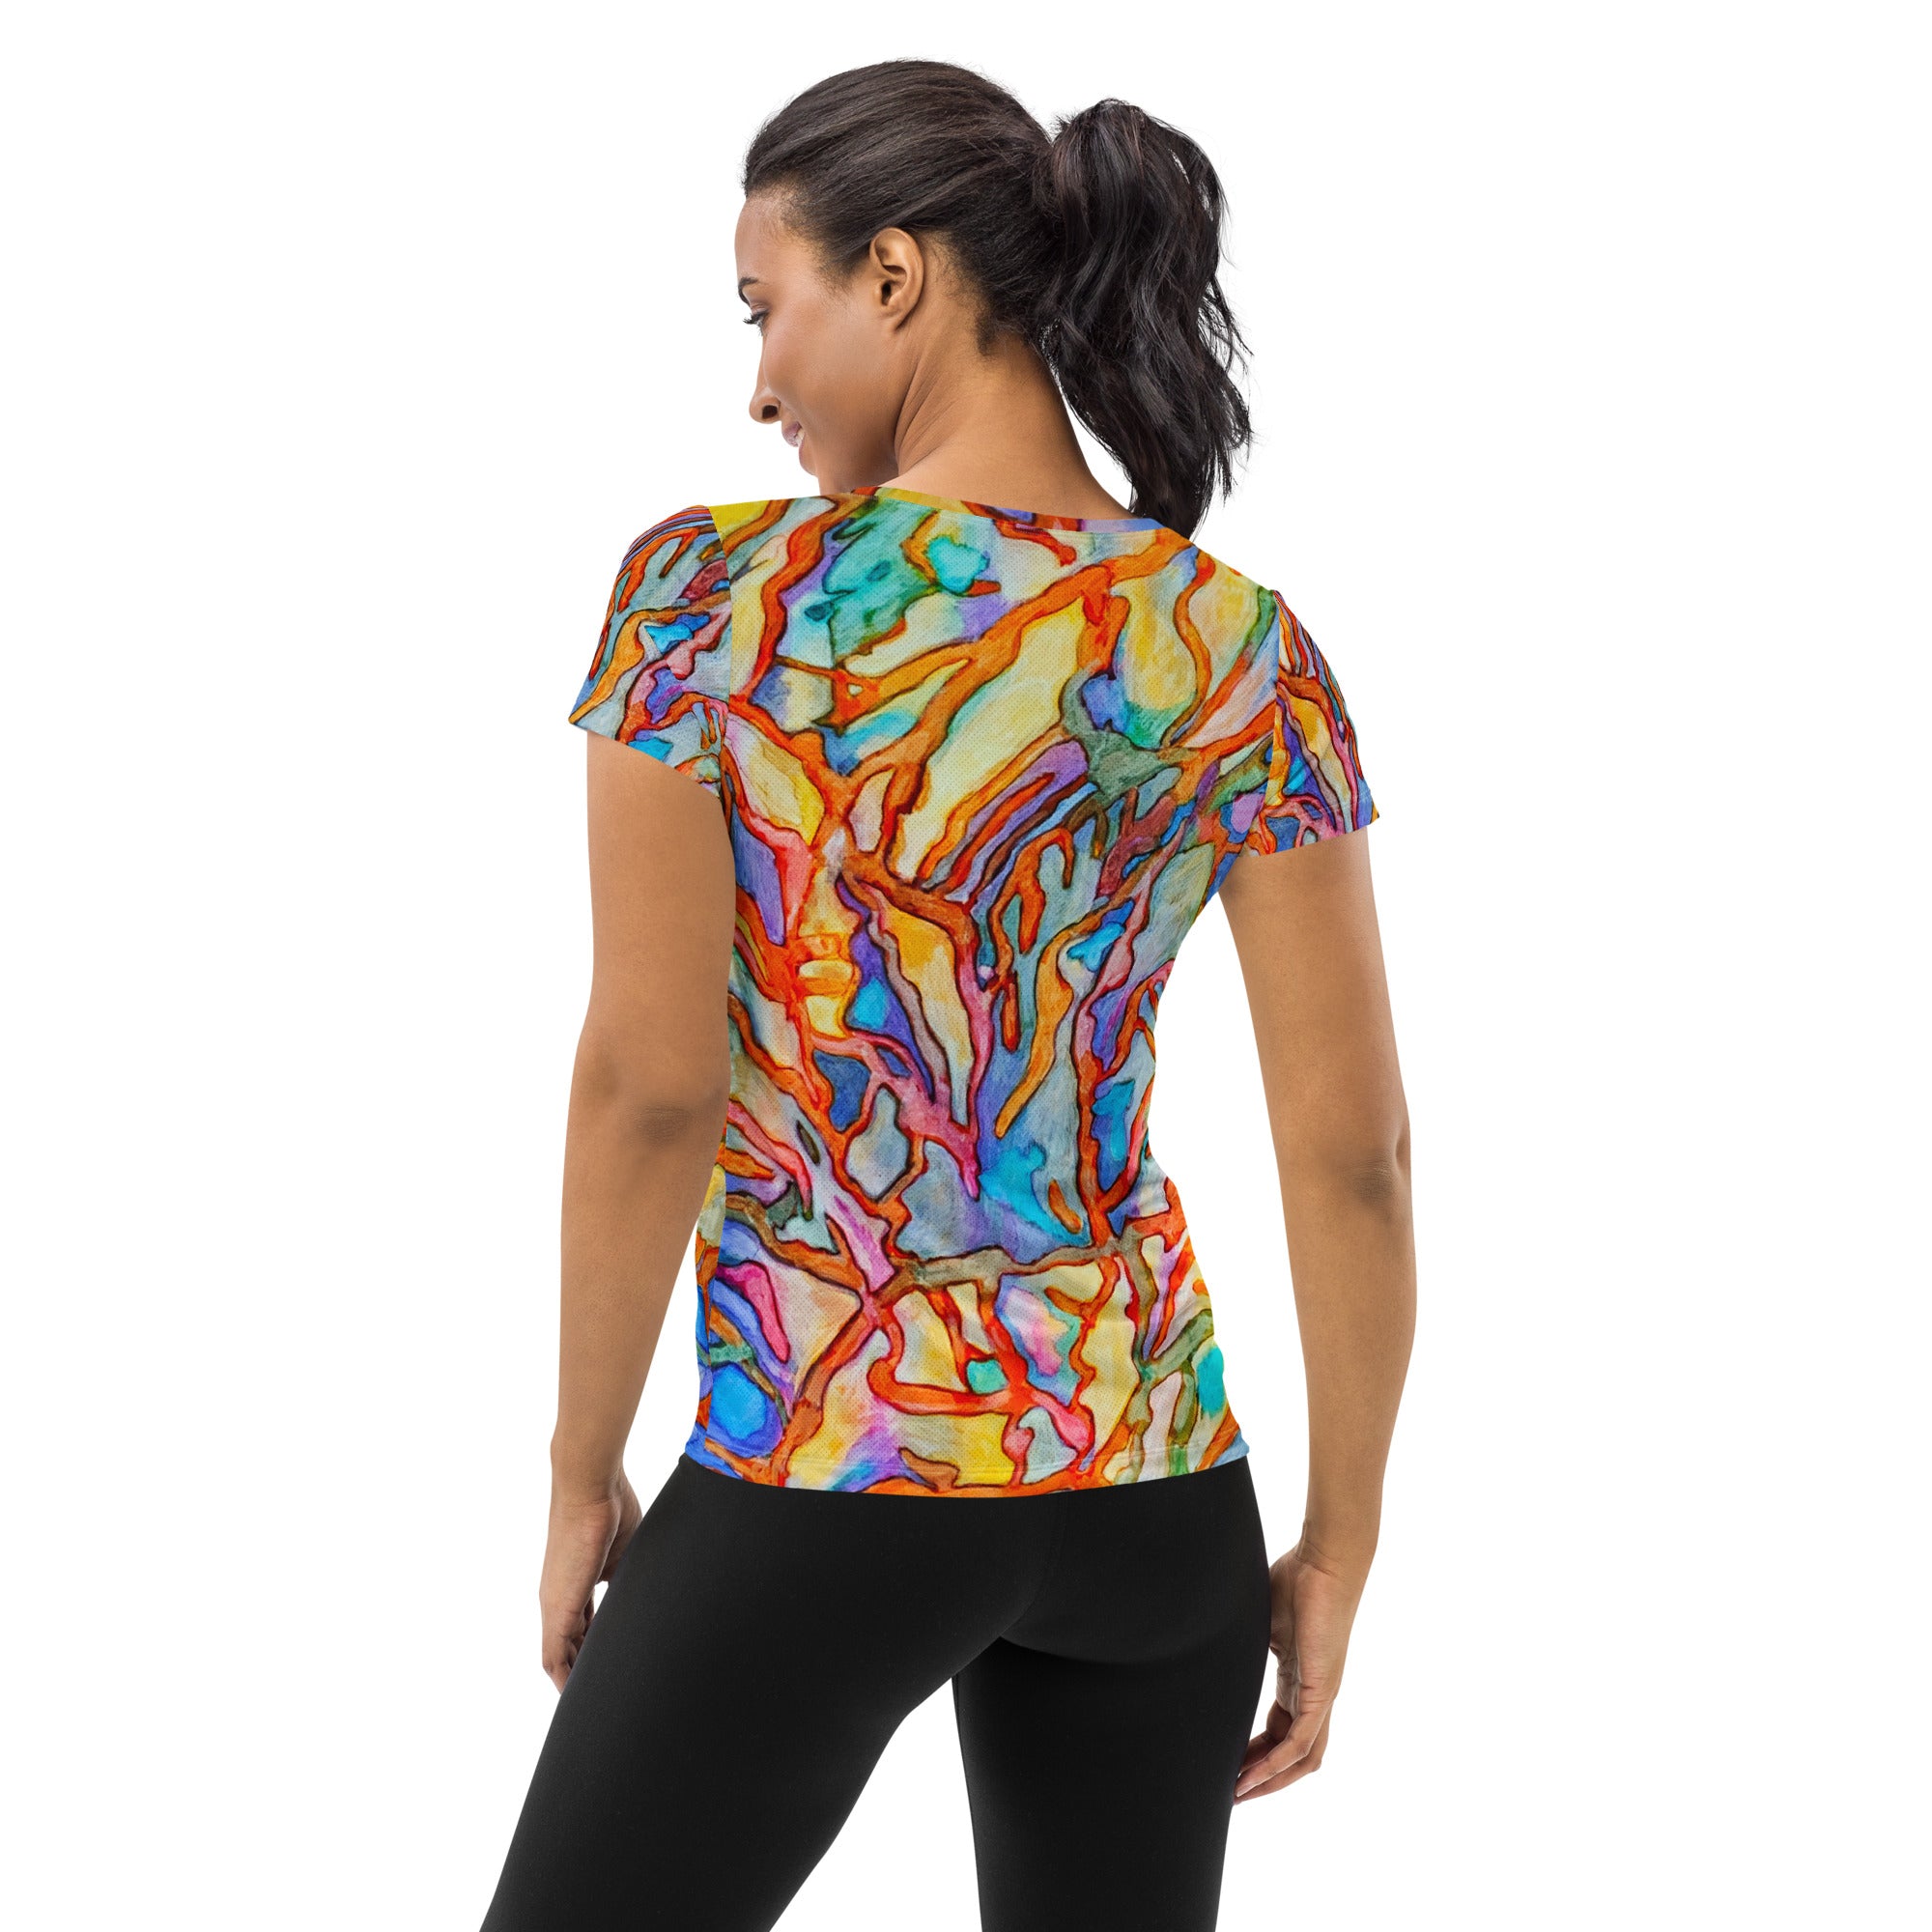 Coral Reef Abstract Women's Athletic T-shirt